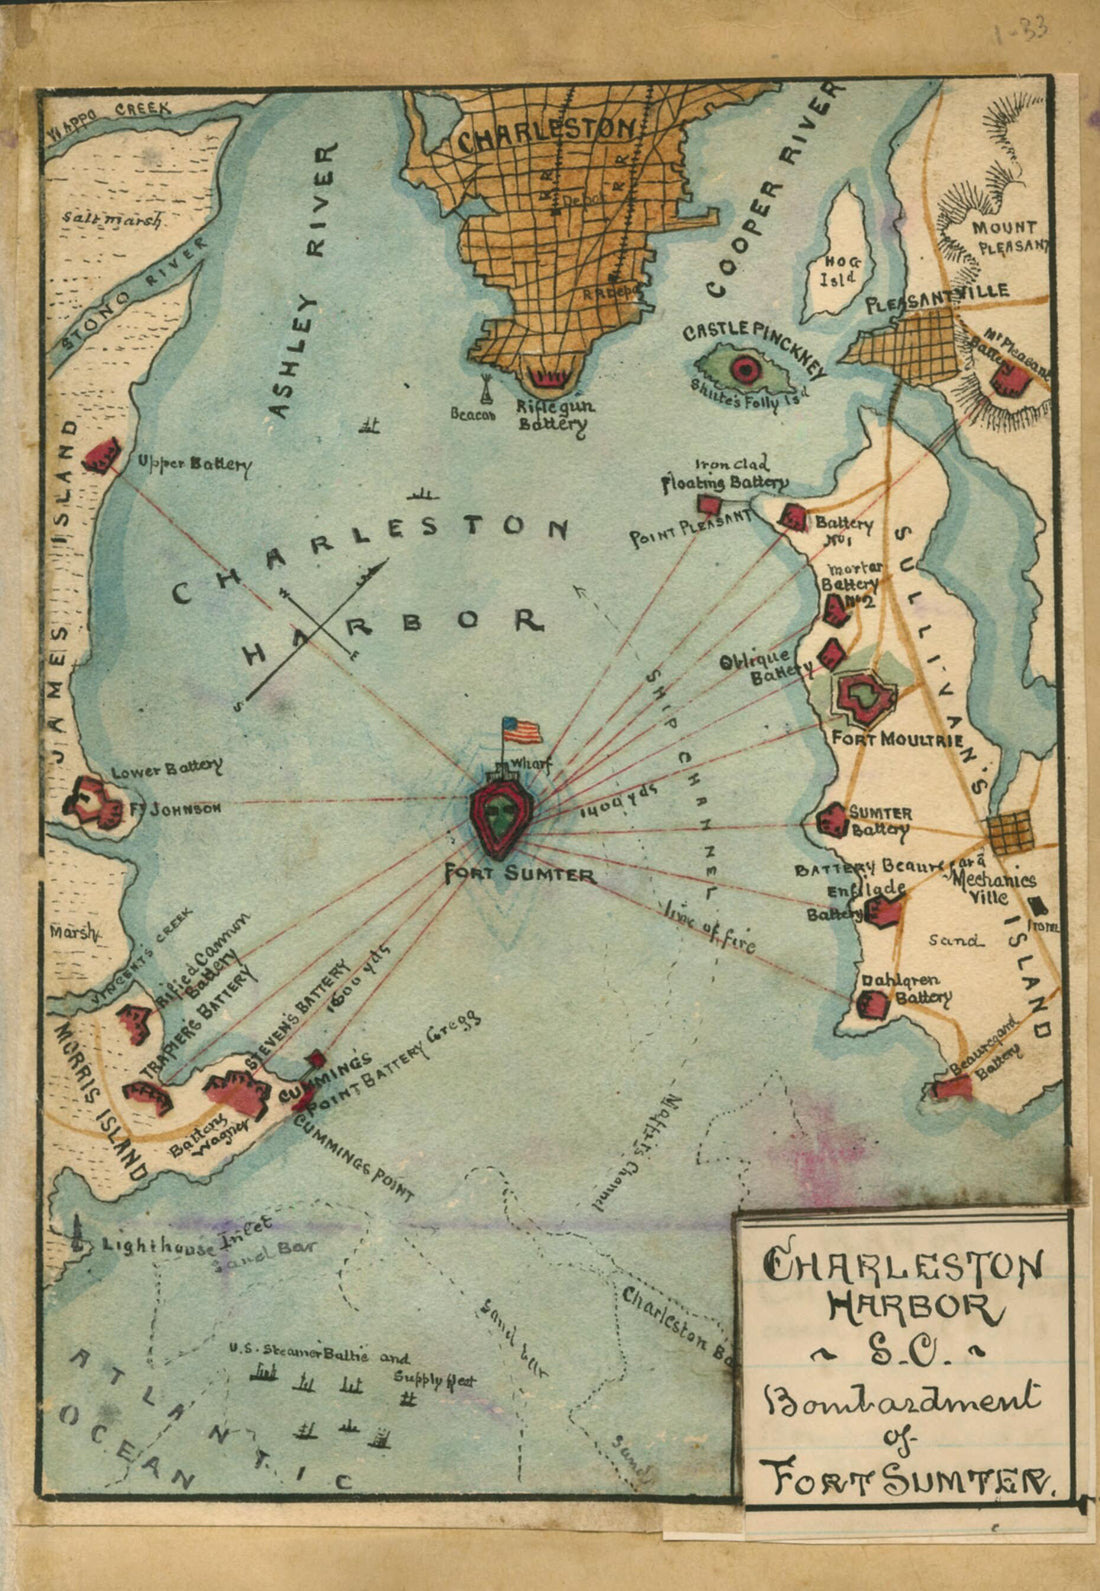 This old map of Charleston Harbor S.C. Bombardment of Fort Sumter from 1861 was created by Robert Knox Sneden in 1861